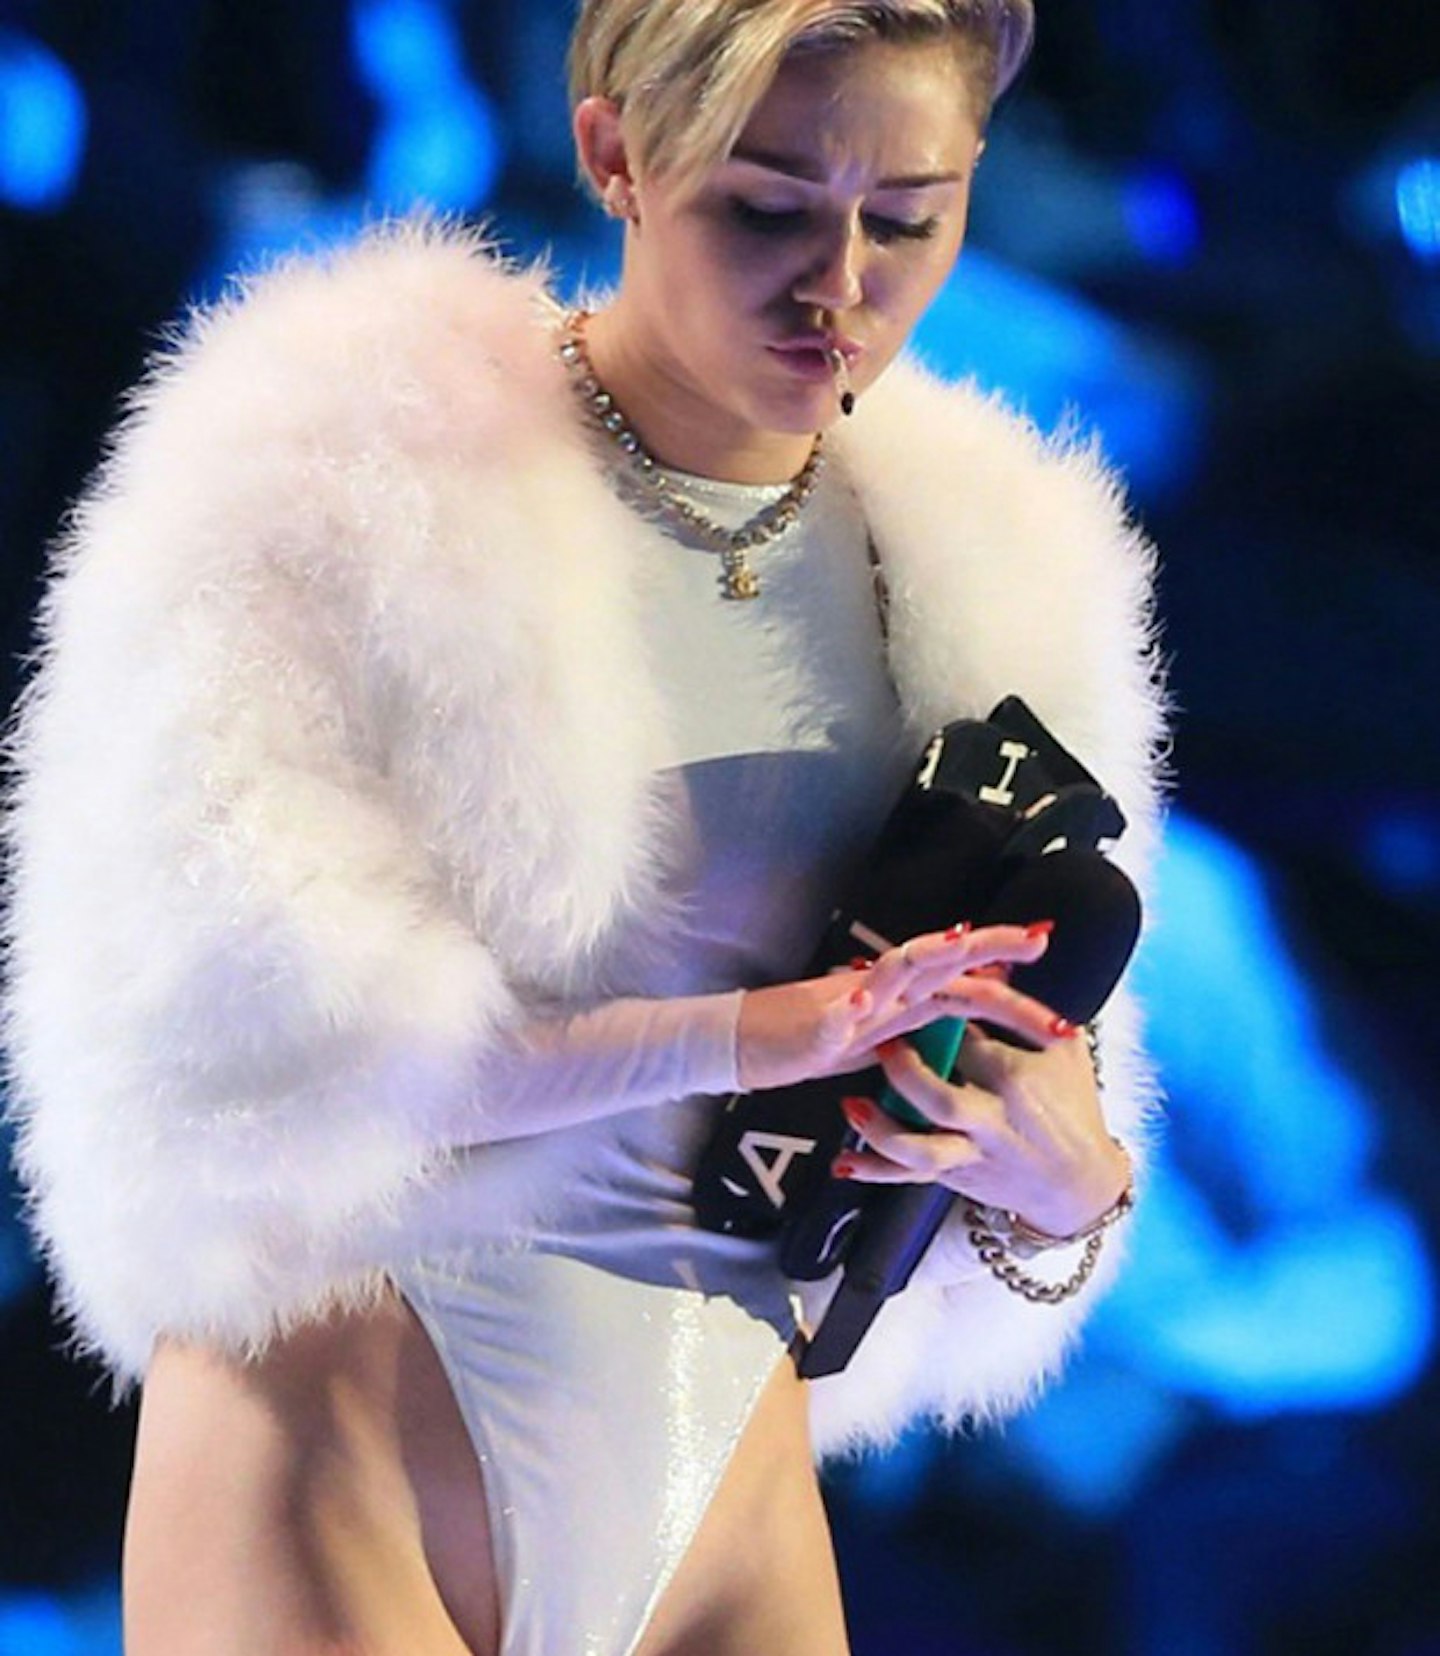 miley-cyrus-smokes-on-stage